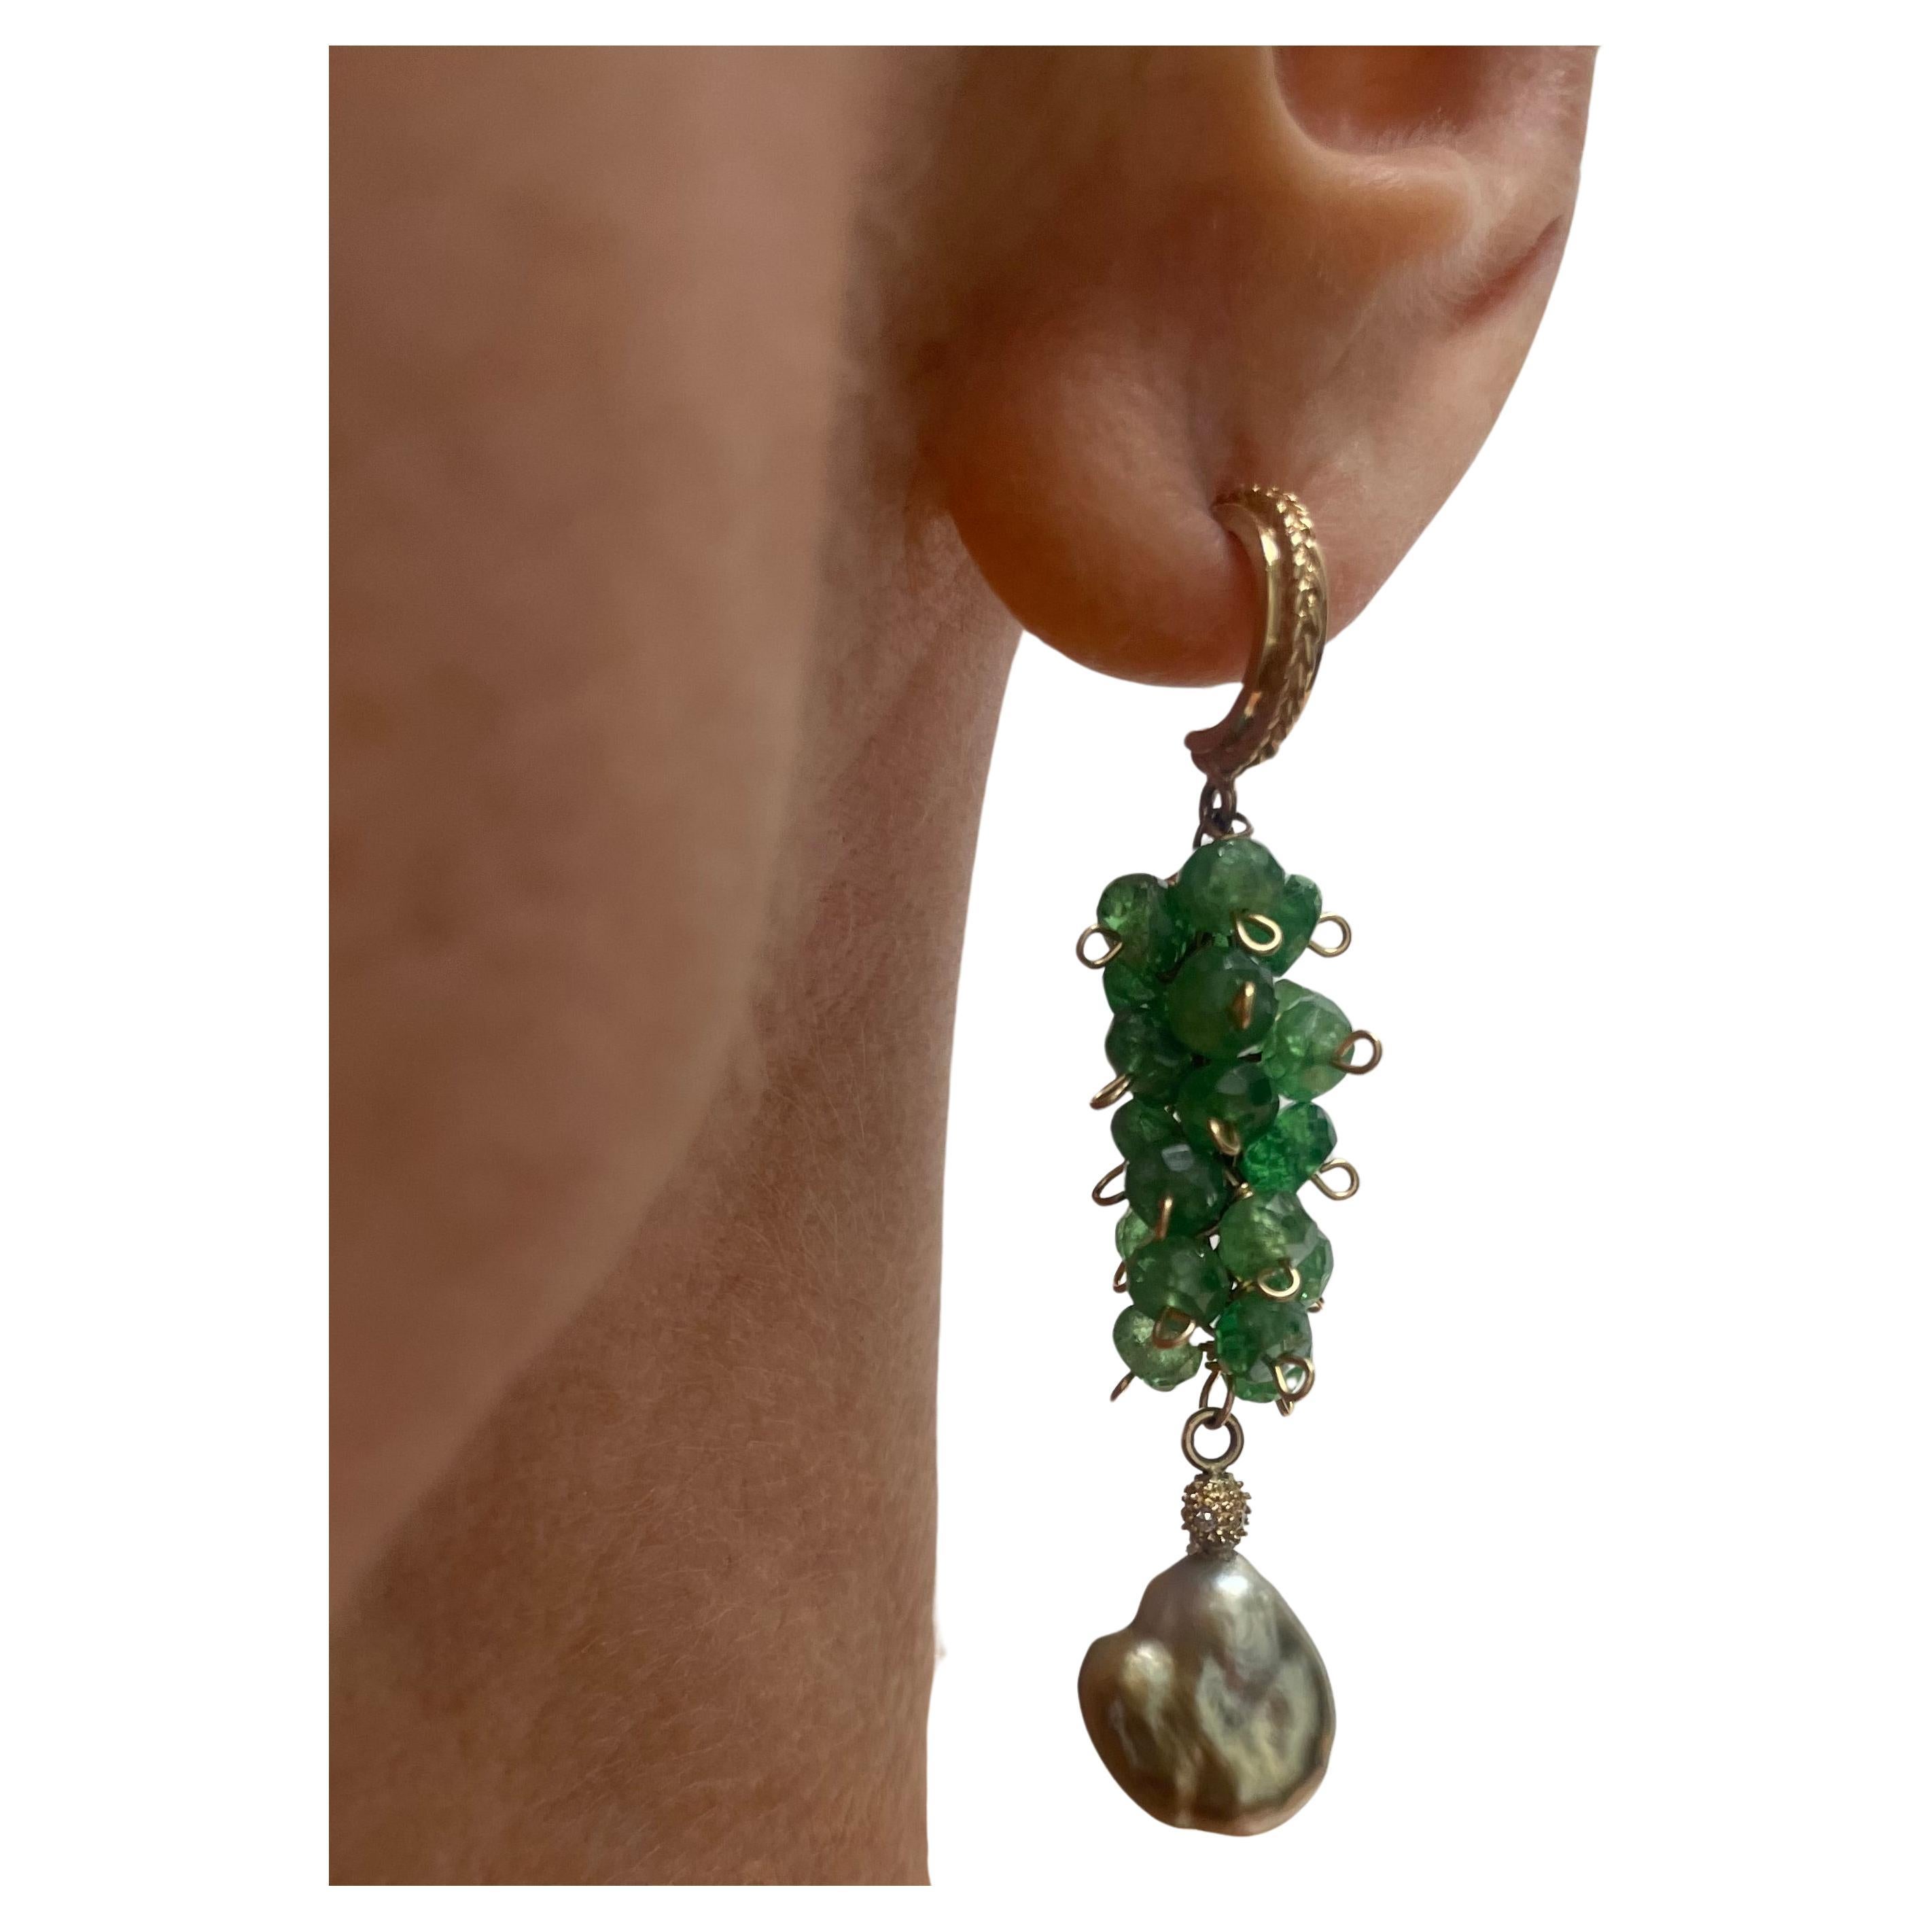 Description
Double rarity! Tsavorite, the rarest of Garnets, whimsically clustered and perfectly arranged to complement the stunning and equally rare natural green Tahitian Keshi pearls accented with a pave diamond ball. How rare do you feel?
Item #